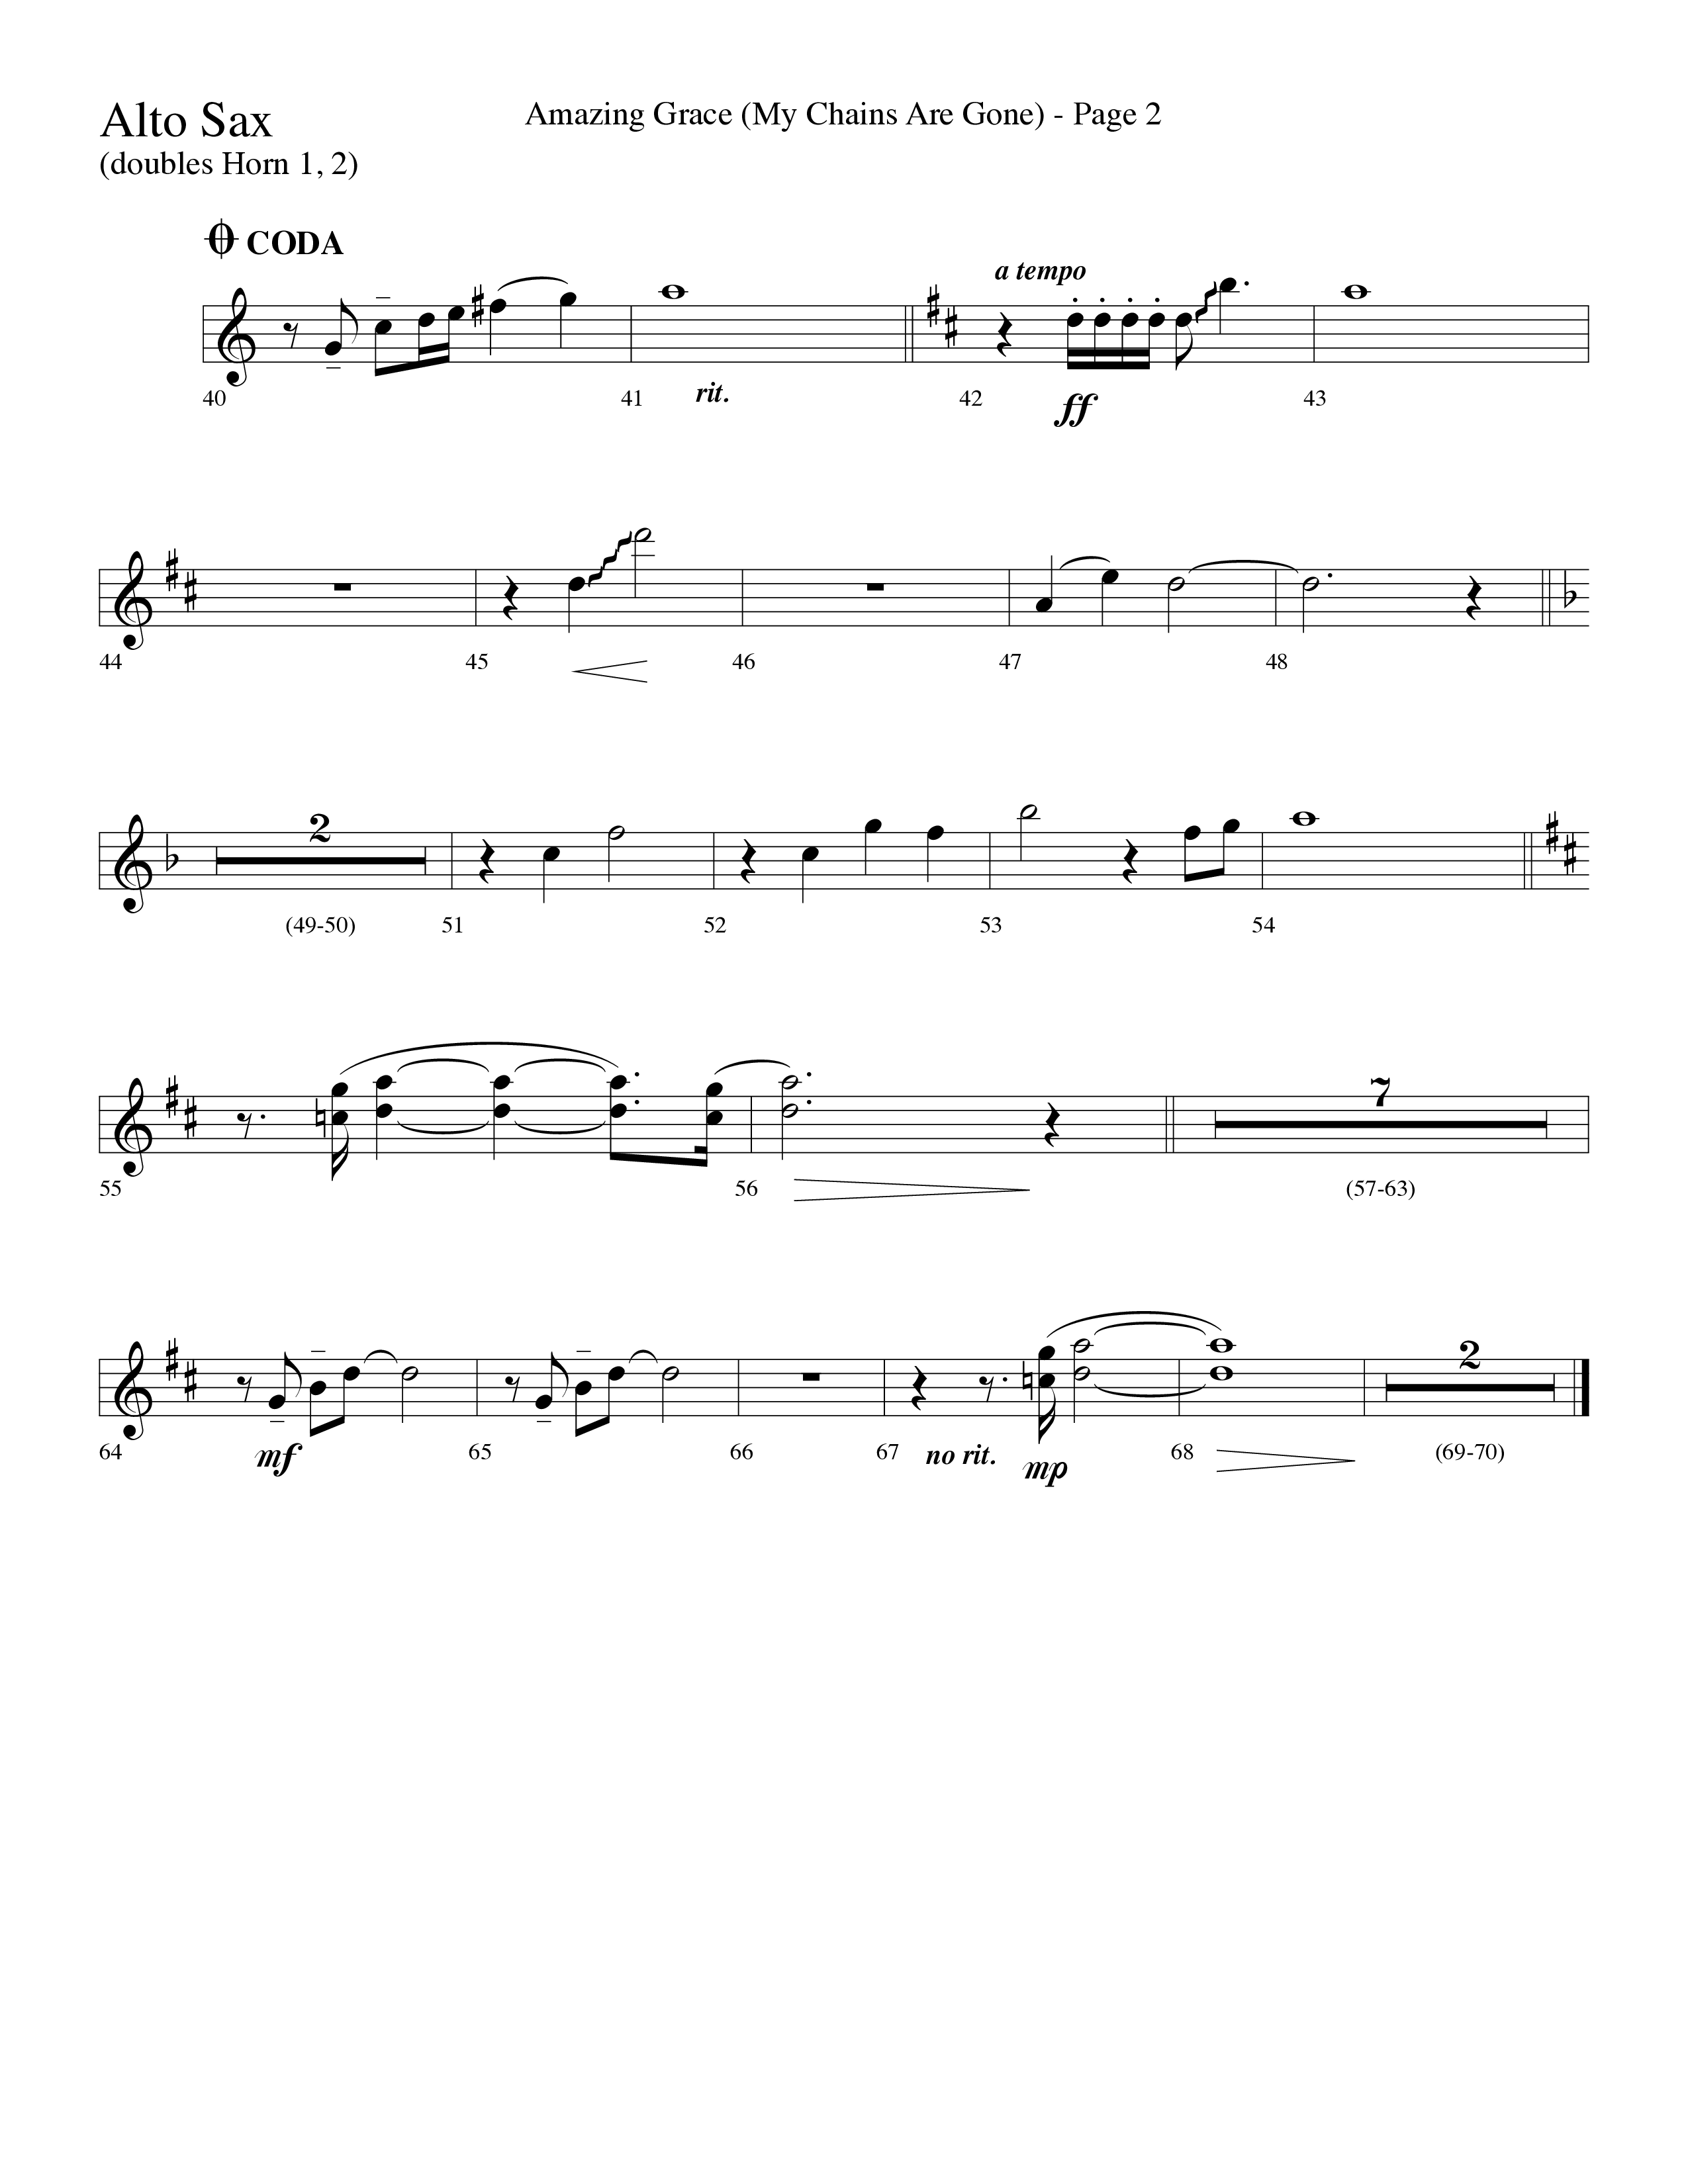 Amazing Grace (My Chains Are Gone) (Choral Anthem SATB) Alto Sax (Lifeway Choral / Arr. Dave Williamson)